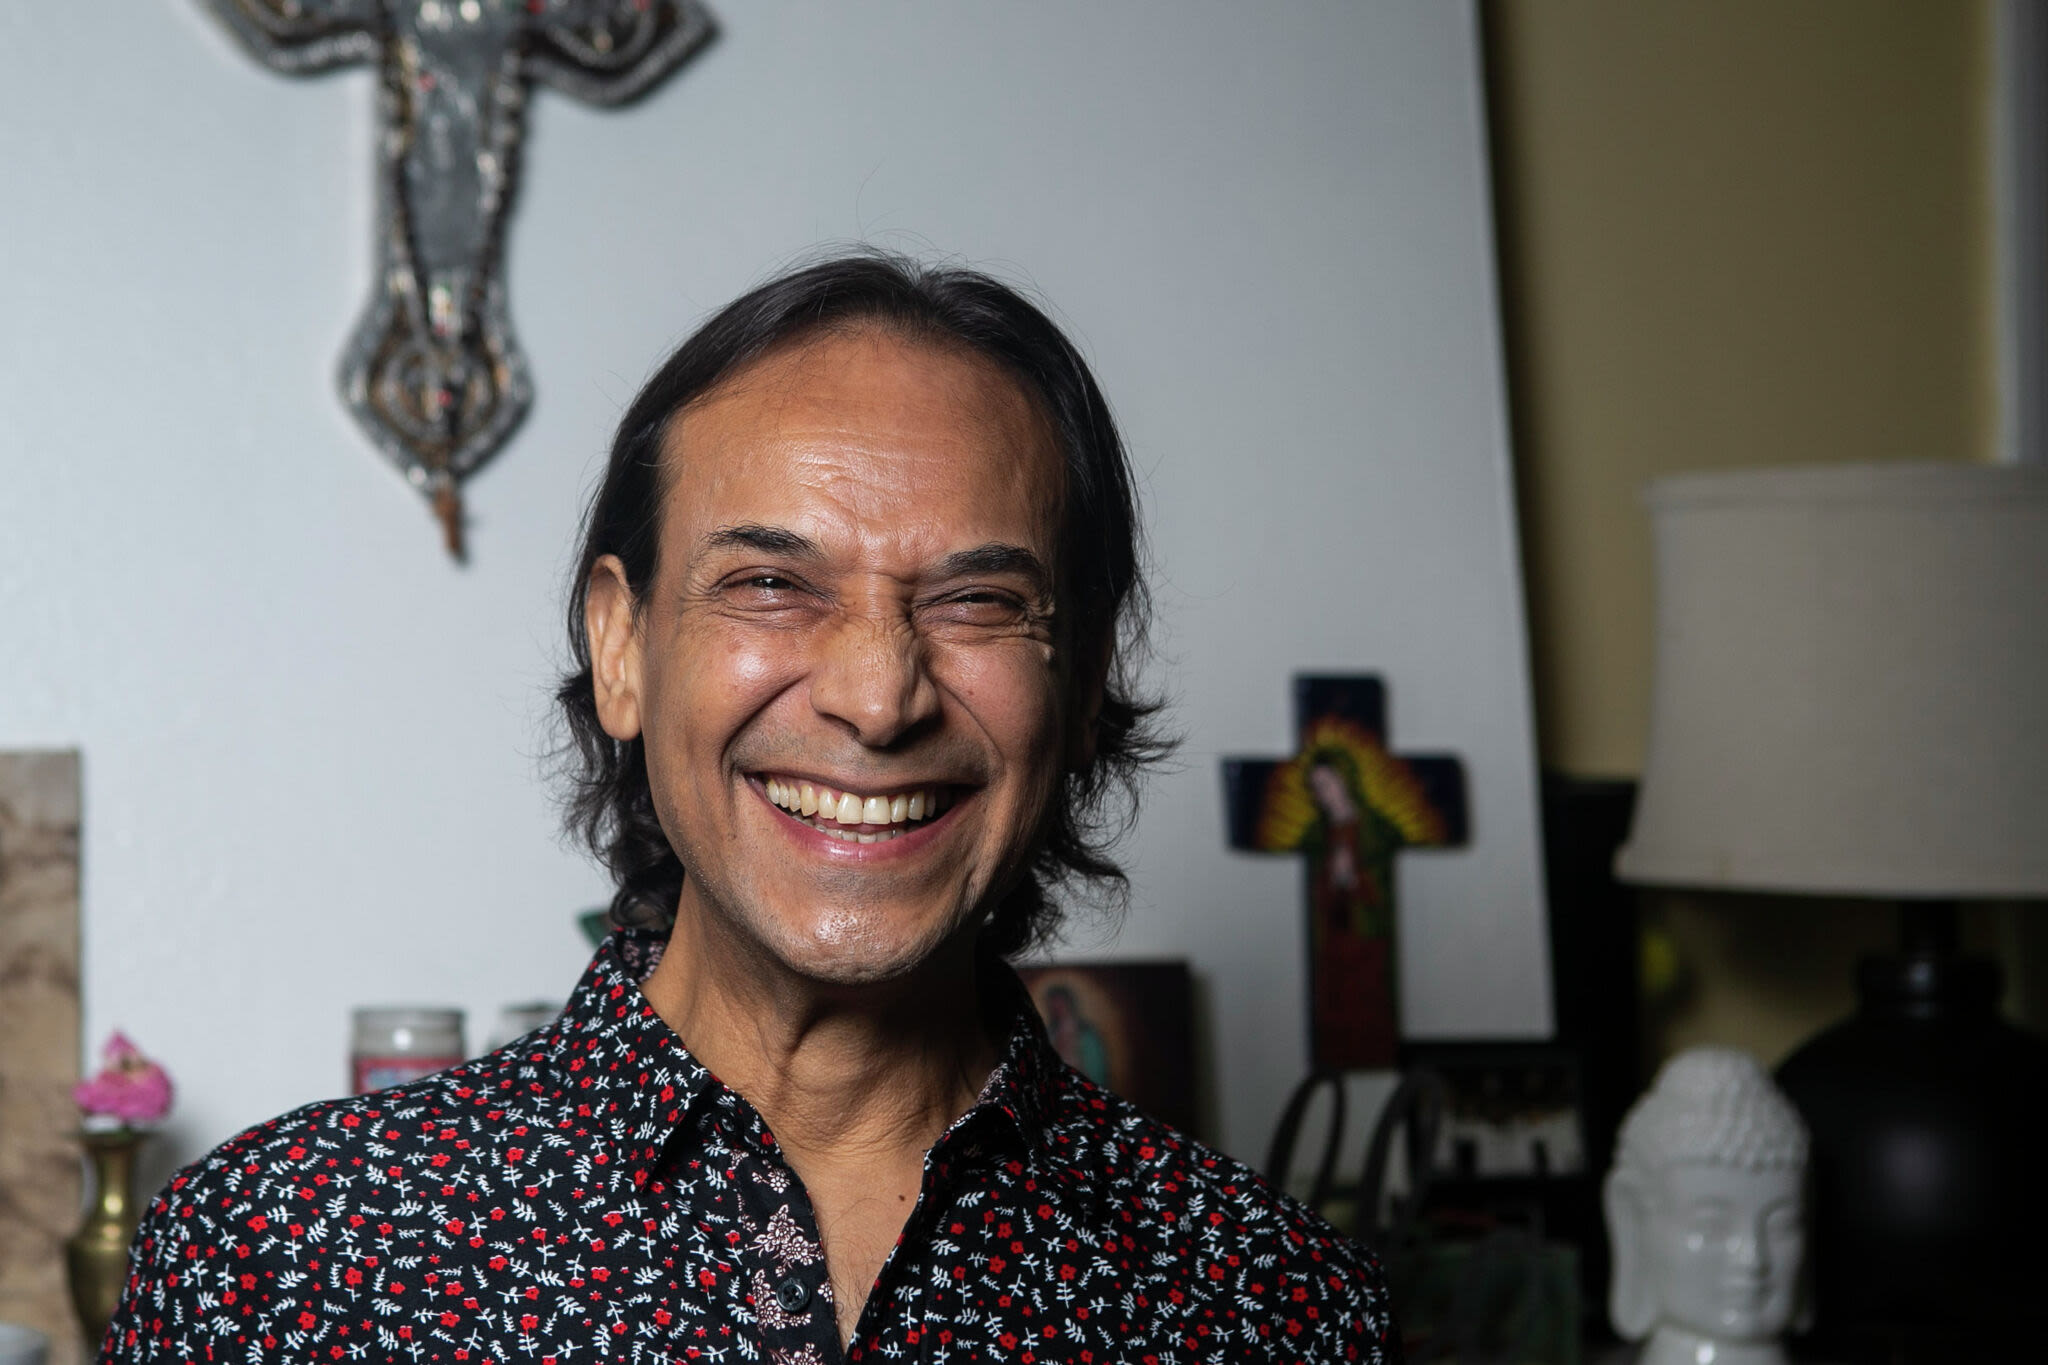 'Blood In Blood Out' actor Jesse Borrego's new film set in San Antonio